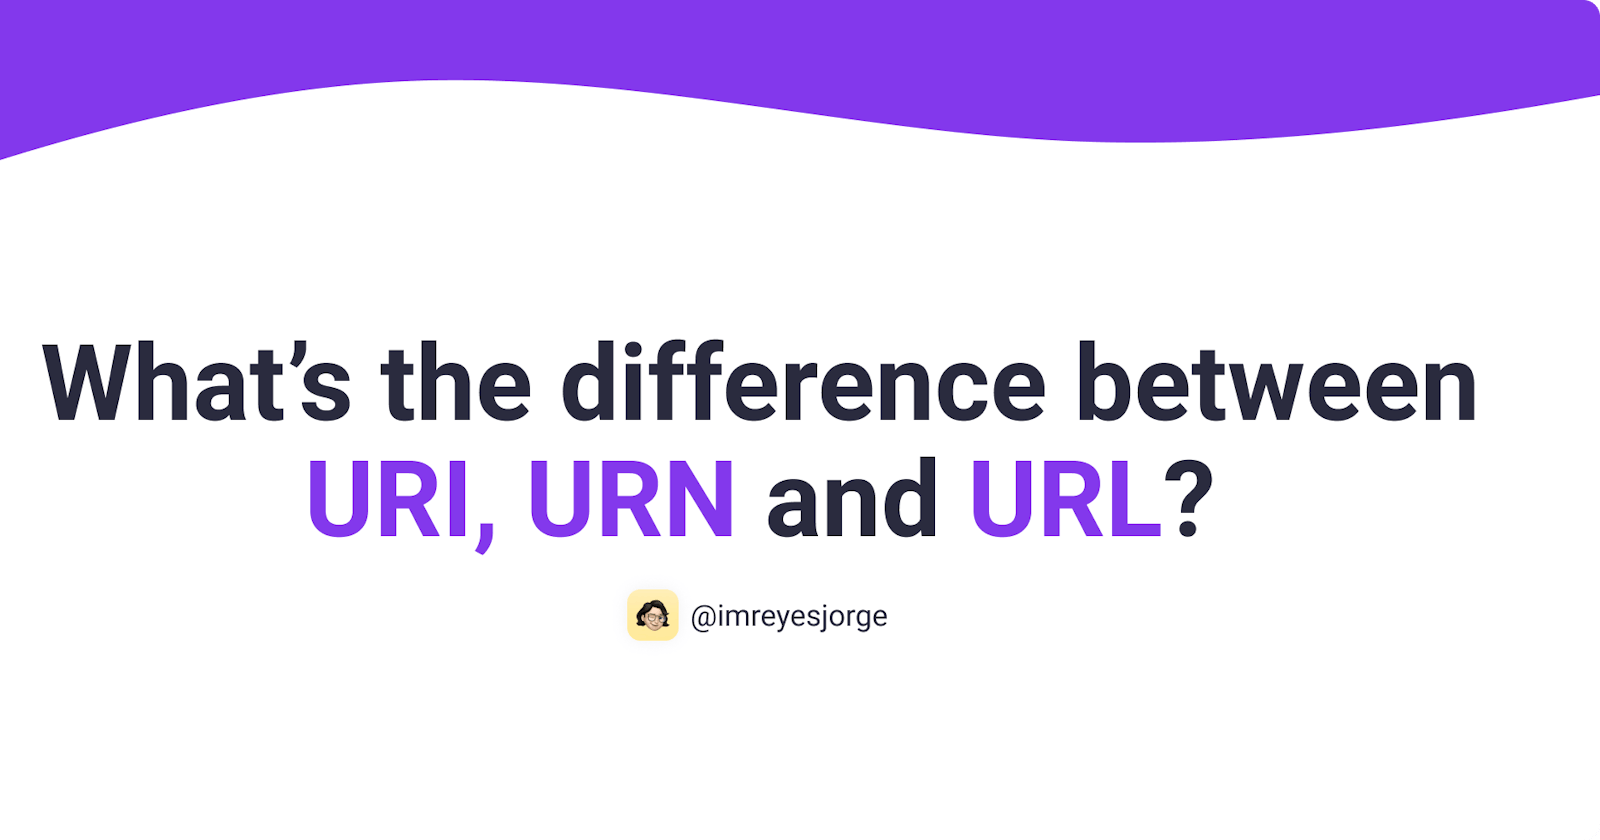 What’s the difference between URI, URN and URL?